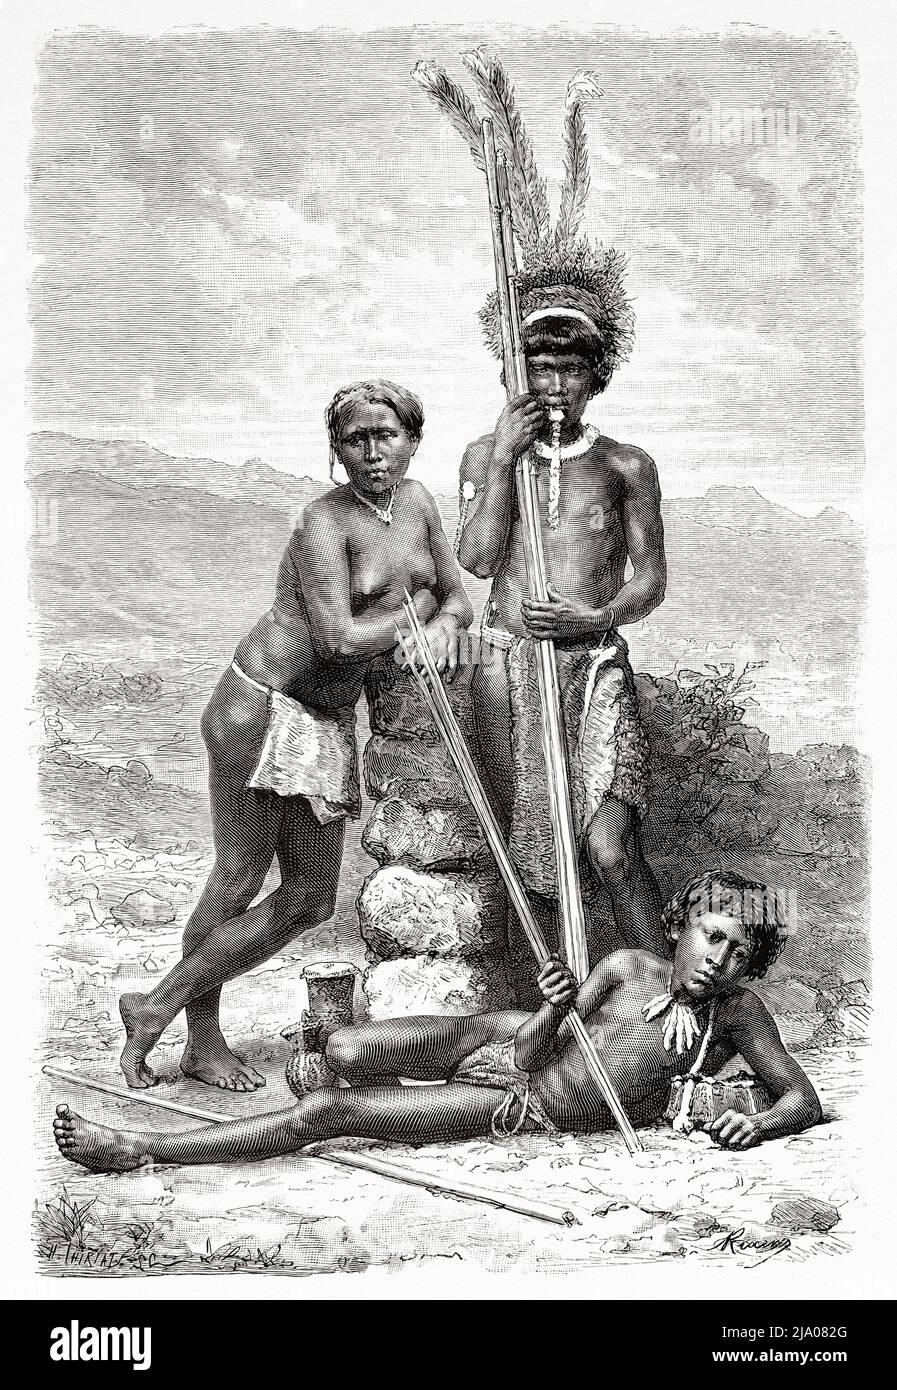 Indigenous natives of Wayana Indians tribe, French Guiana, Department of France, South America. Voyage of exploration in the interior of the Guianas 1877 by Jules Crevaux. Le Tour du Monde 1879 Stock Photo